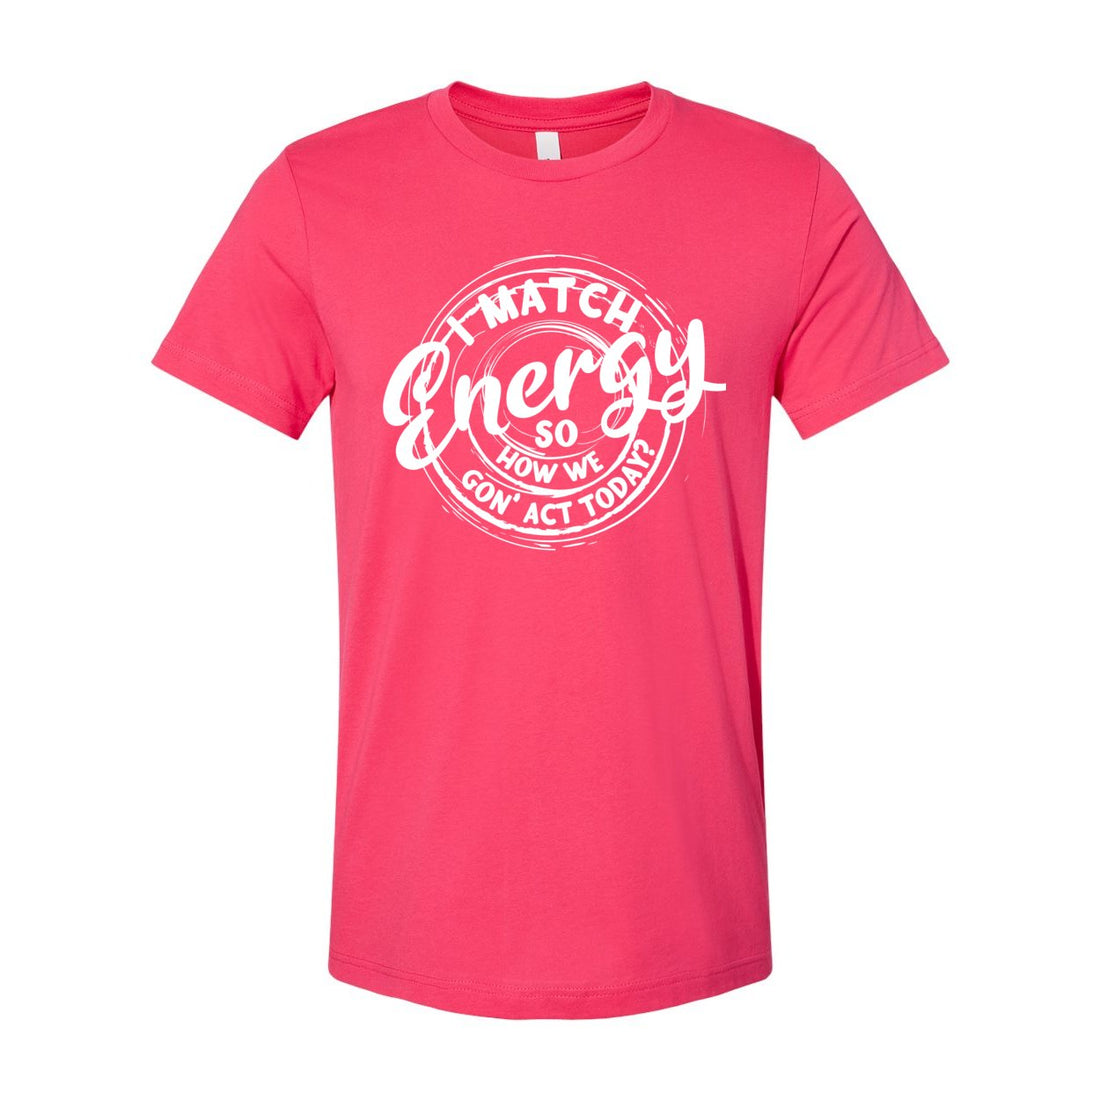 Match Energy Jersey Tee - T-Shirts - Positively Sassy - Match Energy Jersey Tee